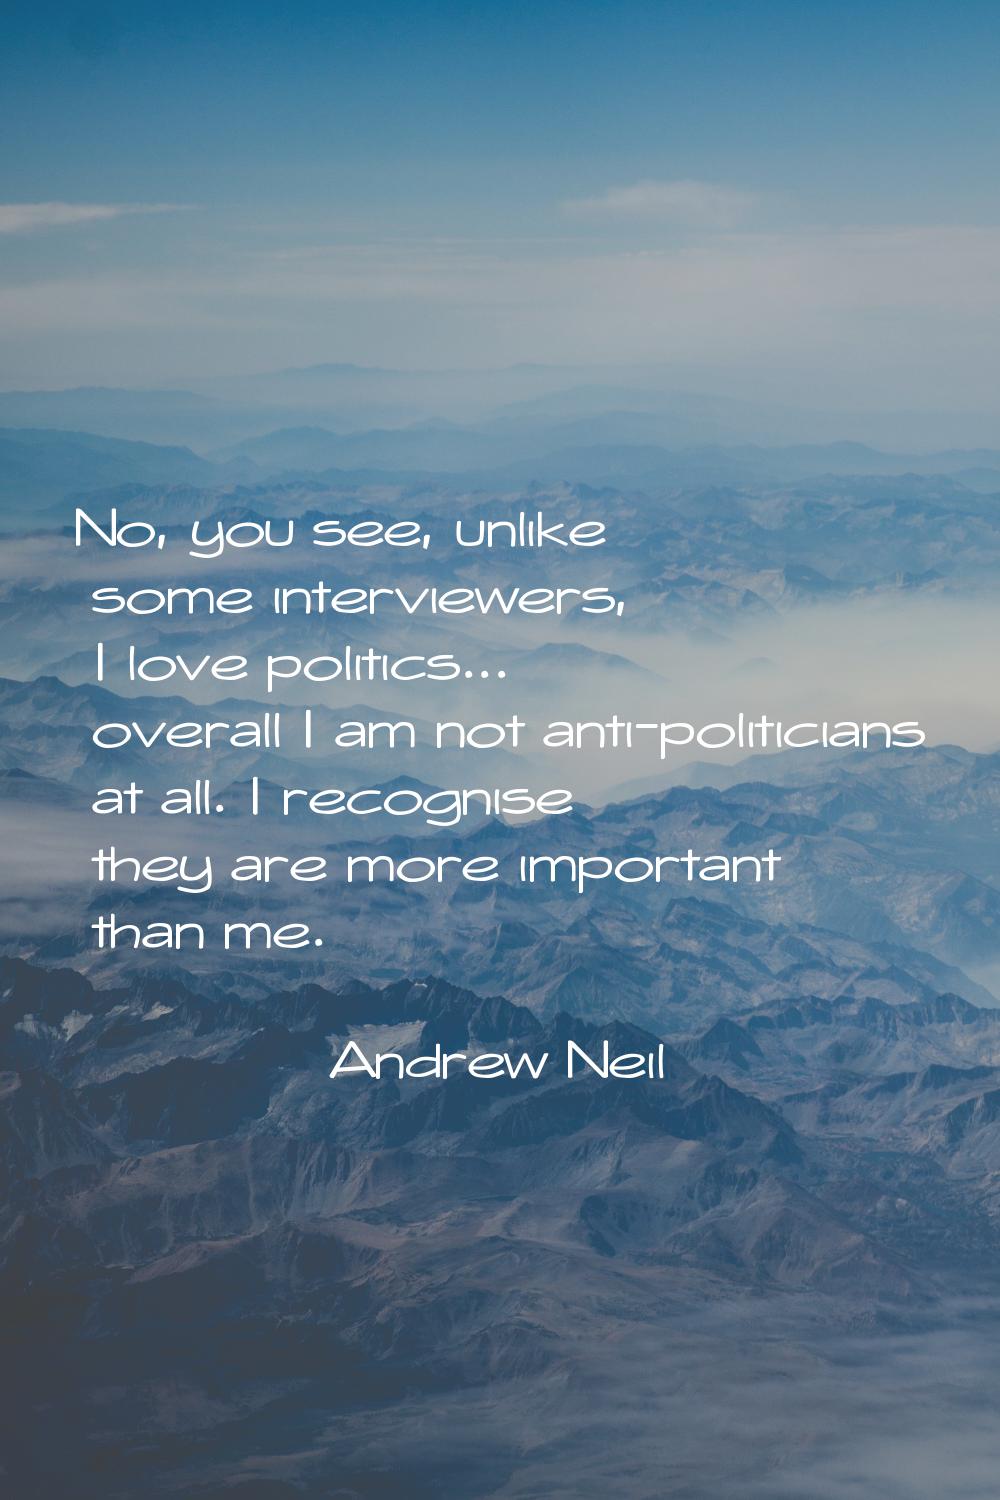 No, you see, unlike some interviewers, I love politics... overall I am not anti-politicians at all.